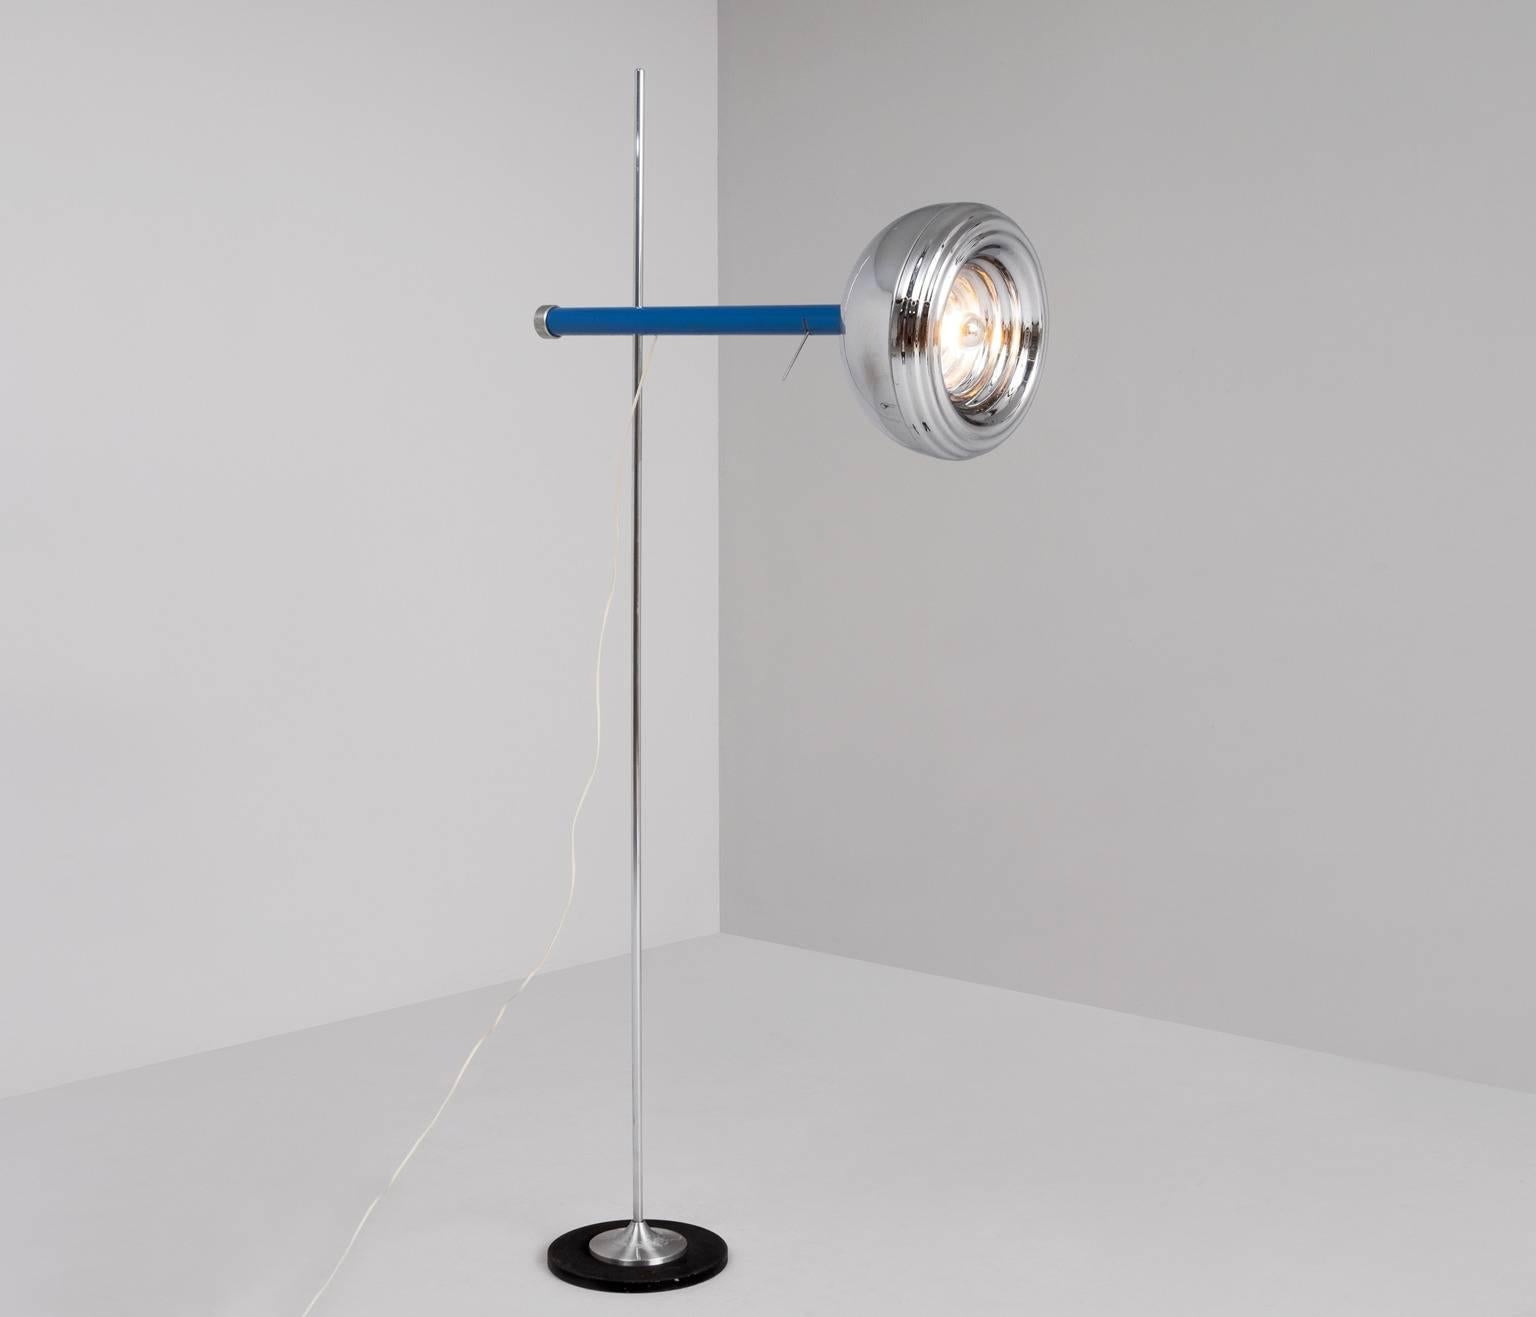 Adjustable floor lamp, in chromed metal, Italy, 1980s.

The well made lamp has a plain base with a chrome vertical stem and an interesting chrome shade. The shade is attached to the vertical base with a horizontal clear blue tube. The corded nut on